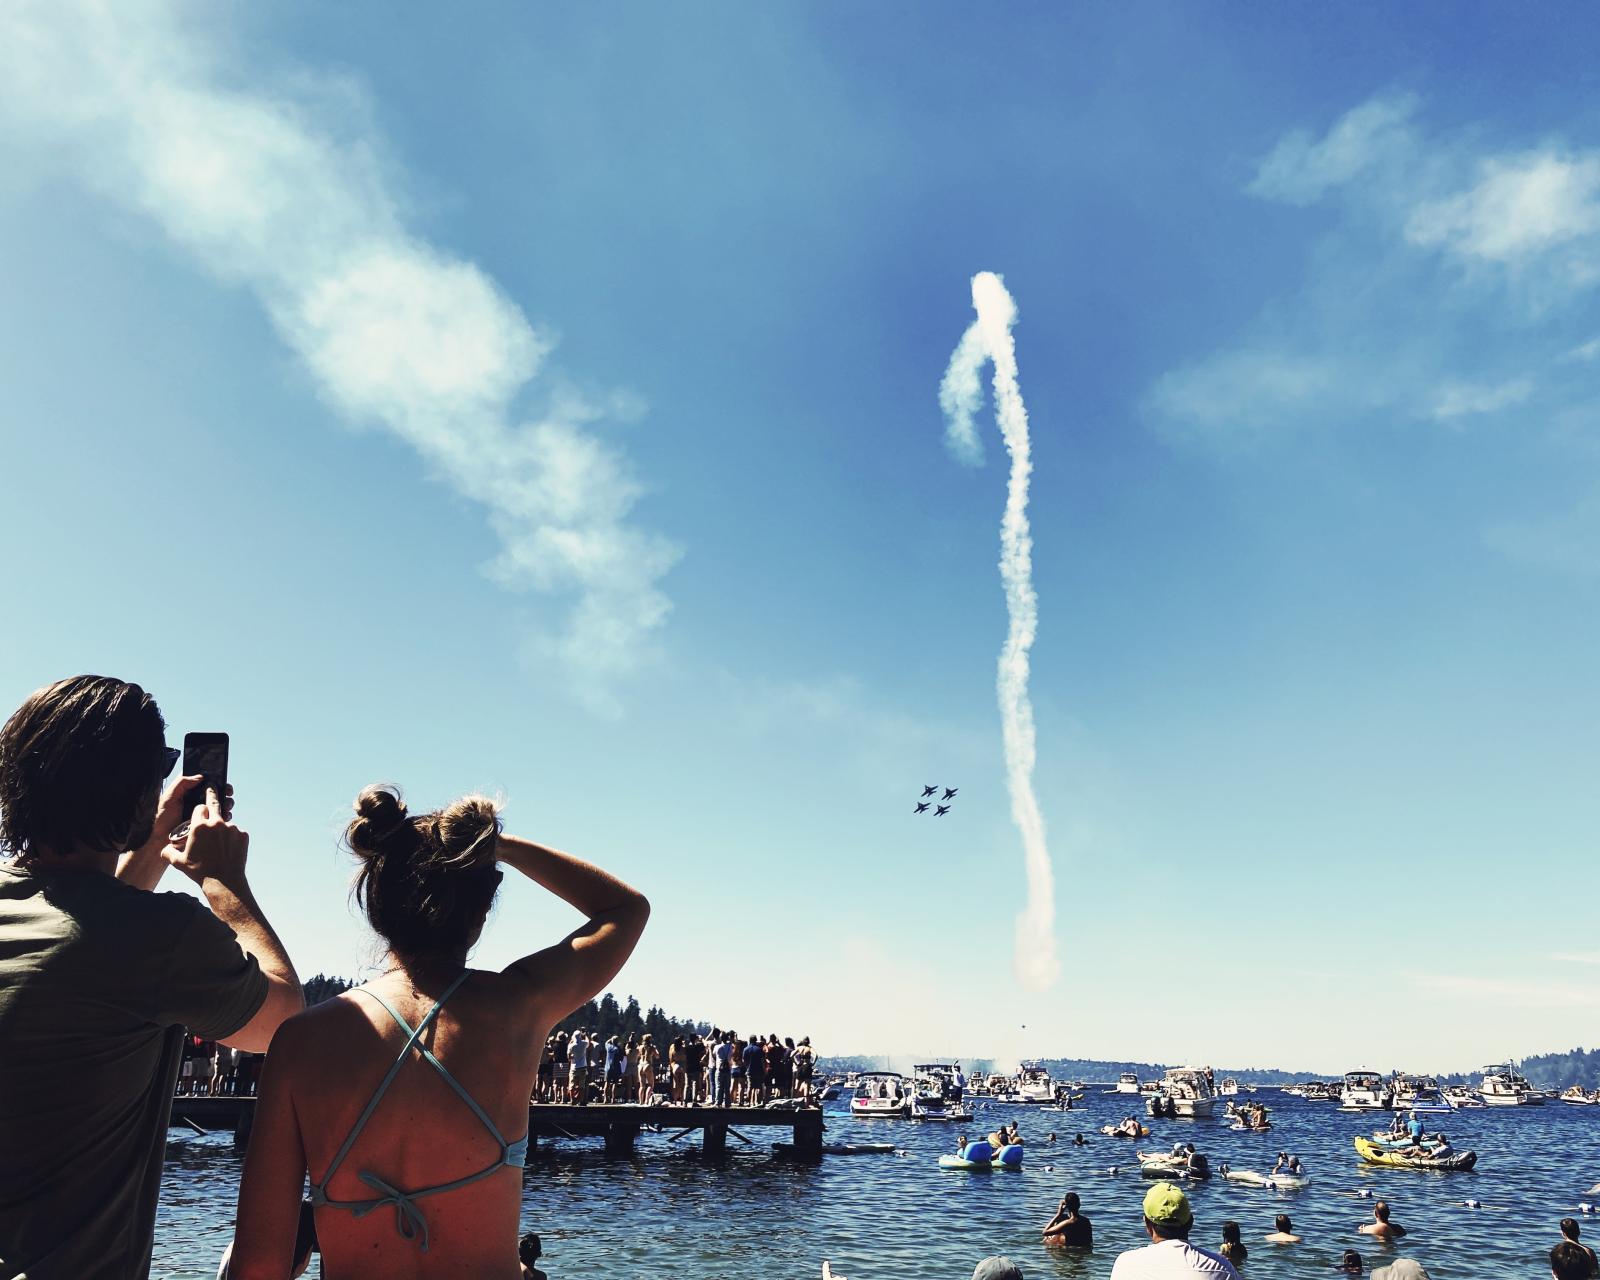 Air Show, Seattle, 2022 | Buy this image